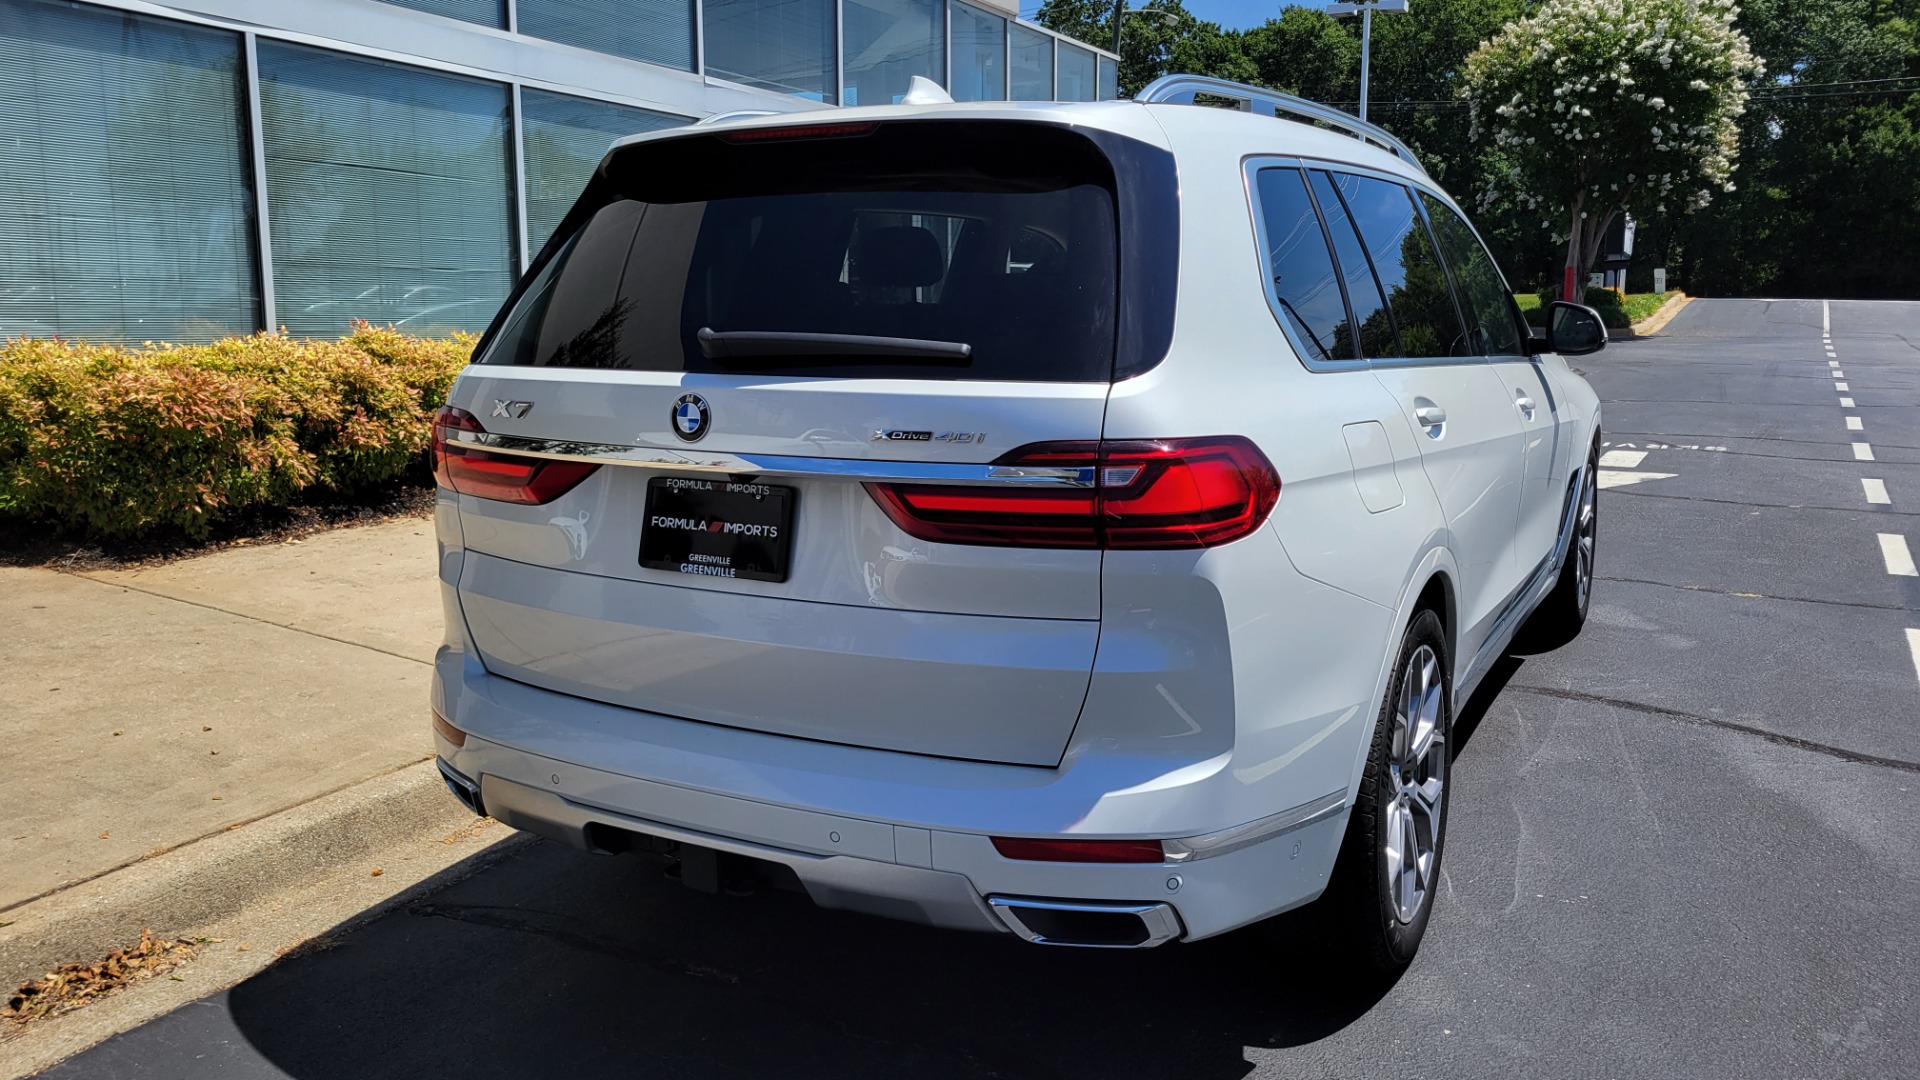 Used 2019 BMW X7 XDRIVE40I PREMIUM / NAV / HUD / PARK ASST PLUS / REMOTE START / 3D VIEW for sale $62,995 at Formula Imports in Charlotte NC 28227 8